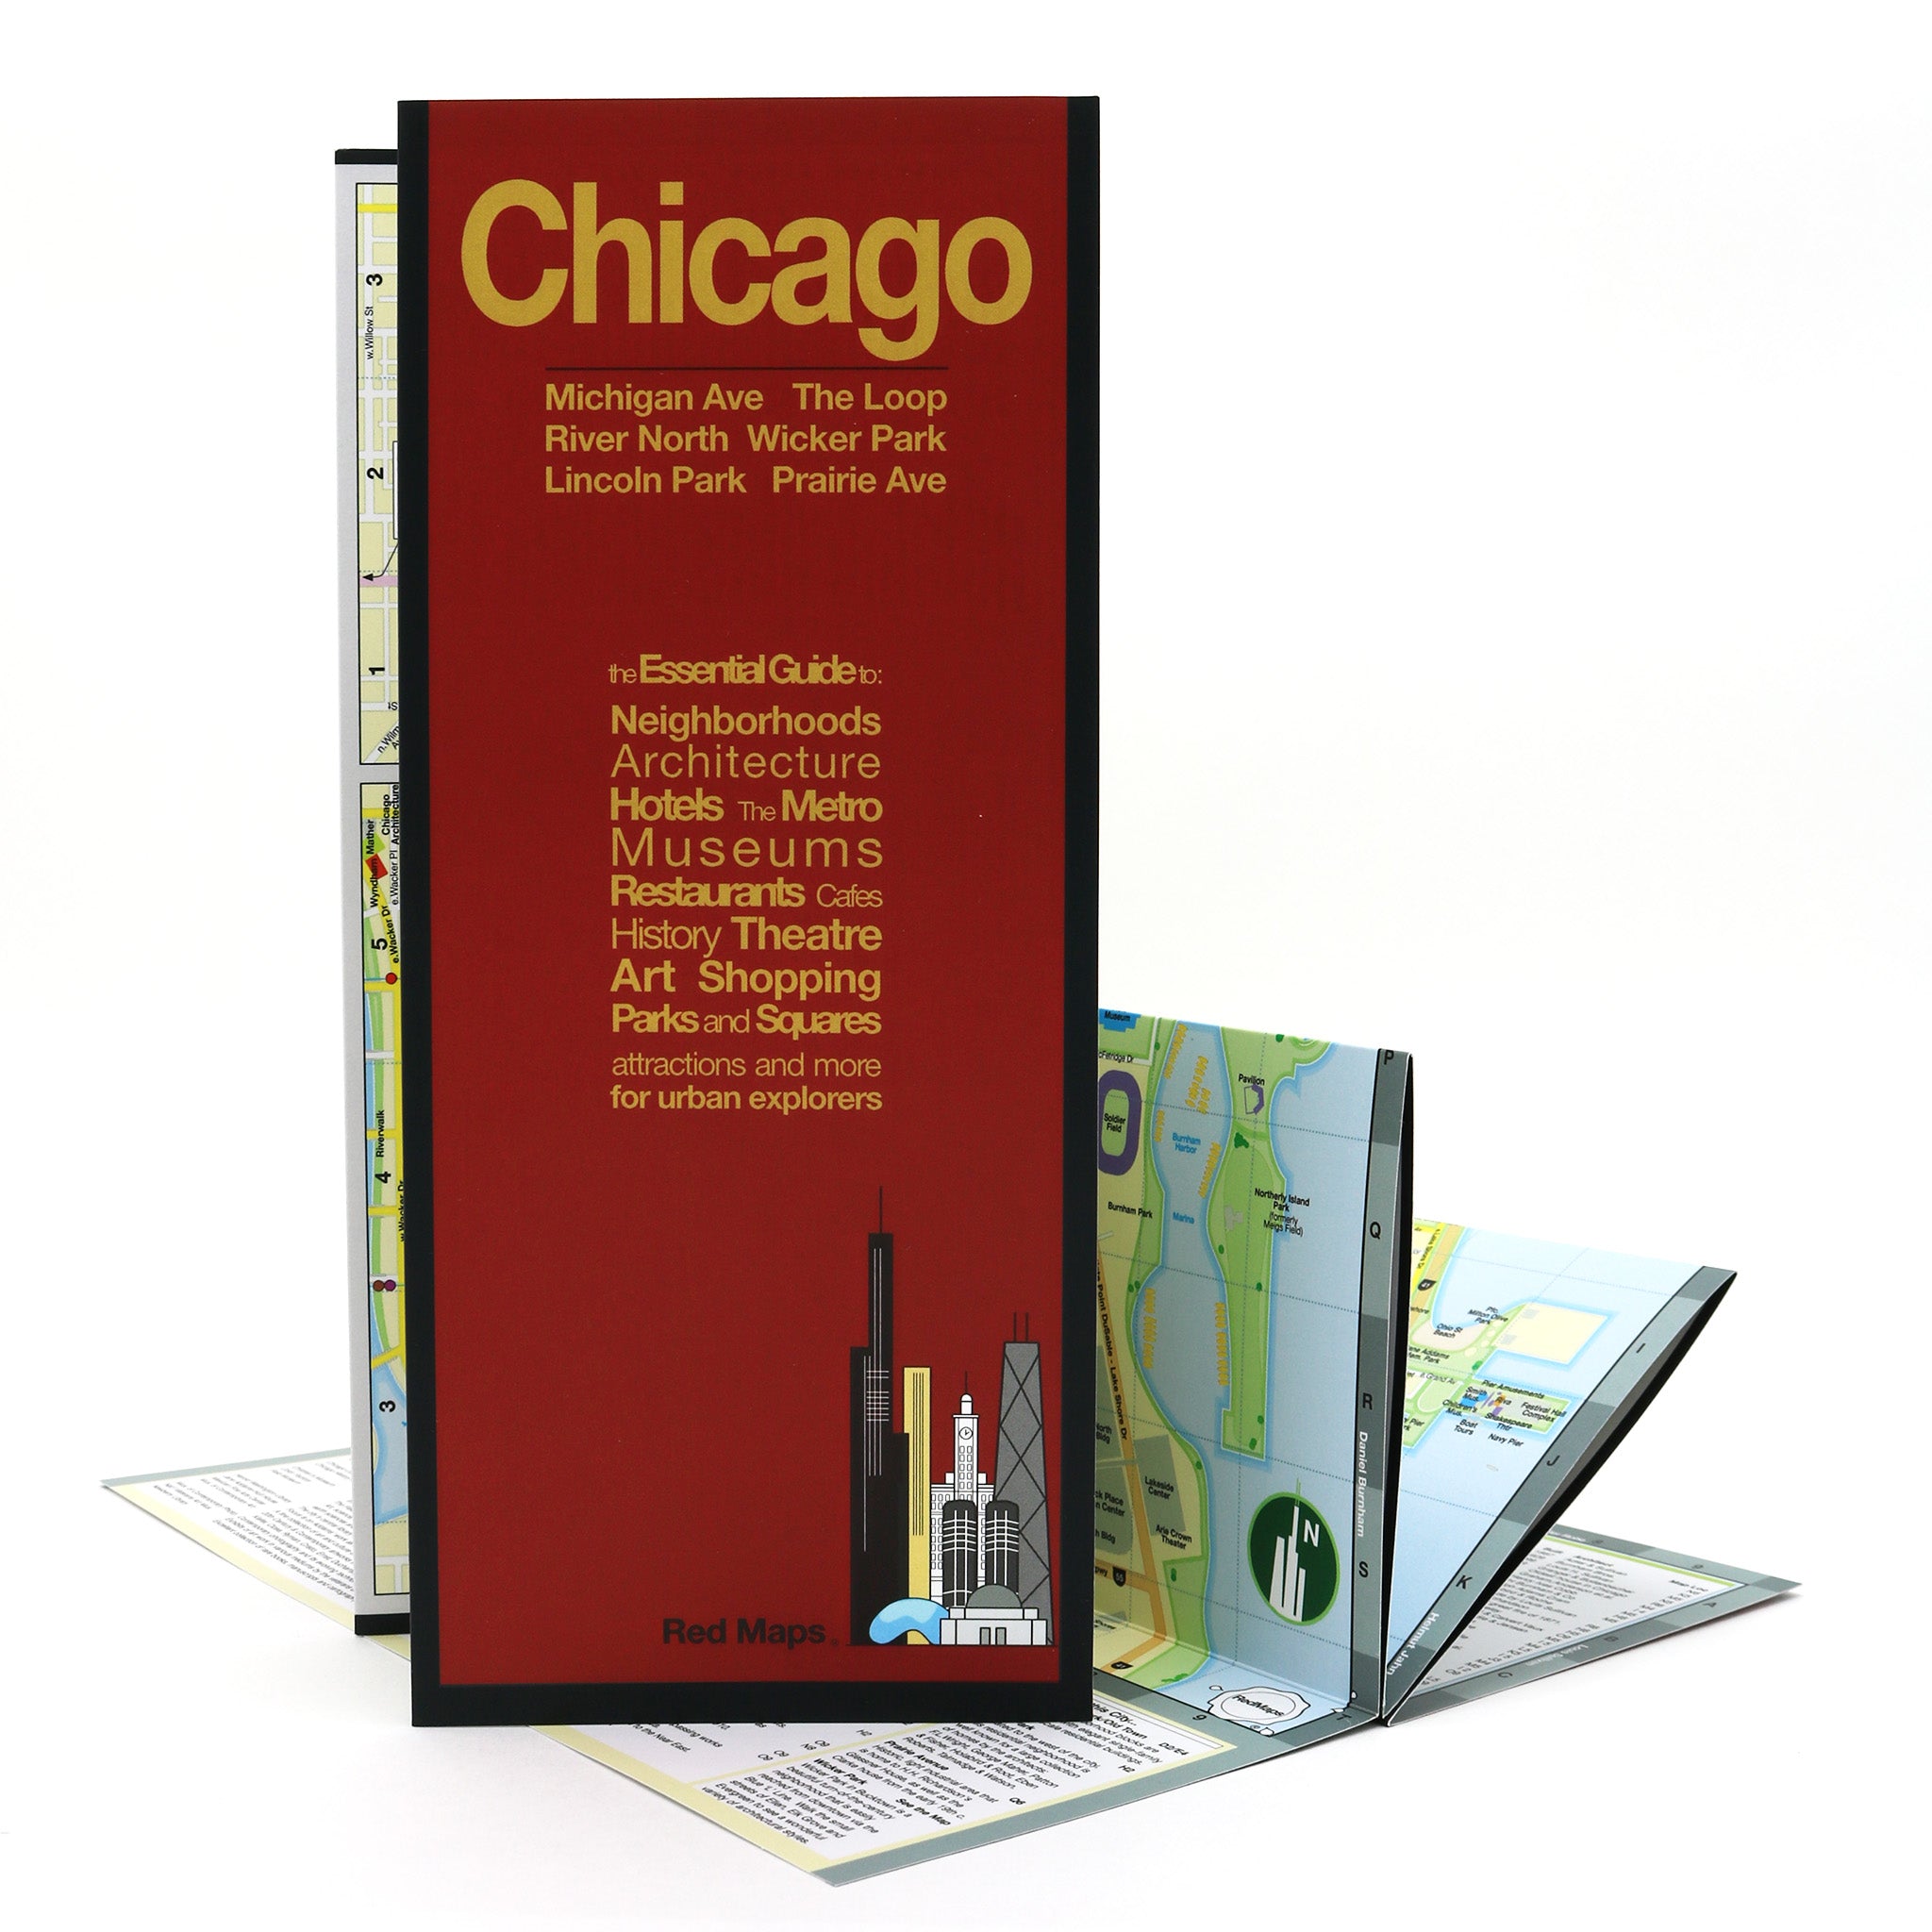 Chicago map with popular attractions in the city center.